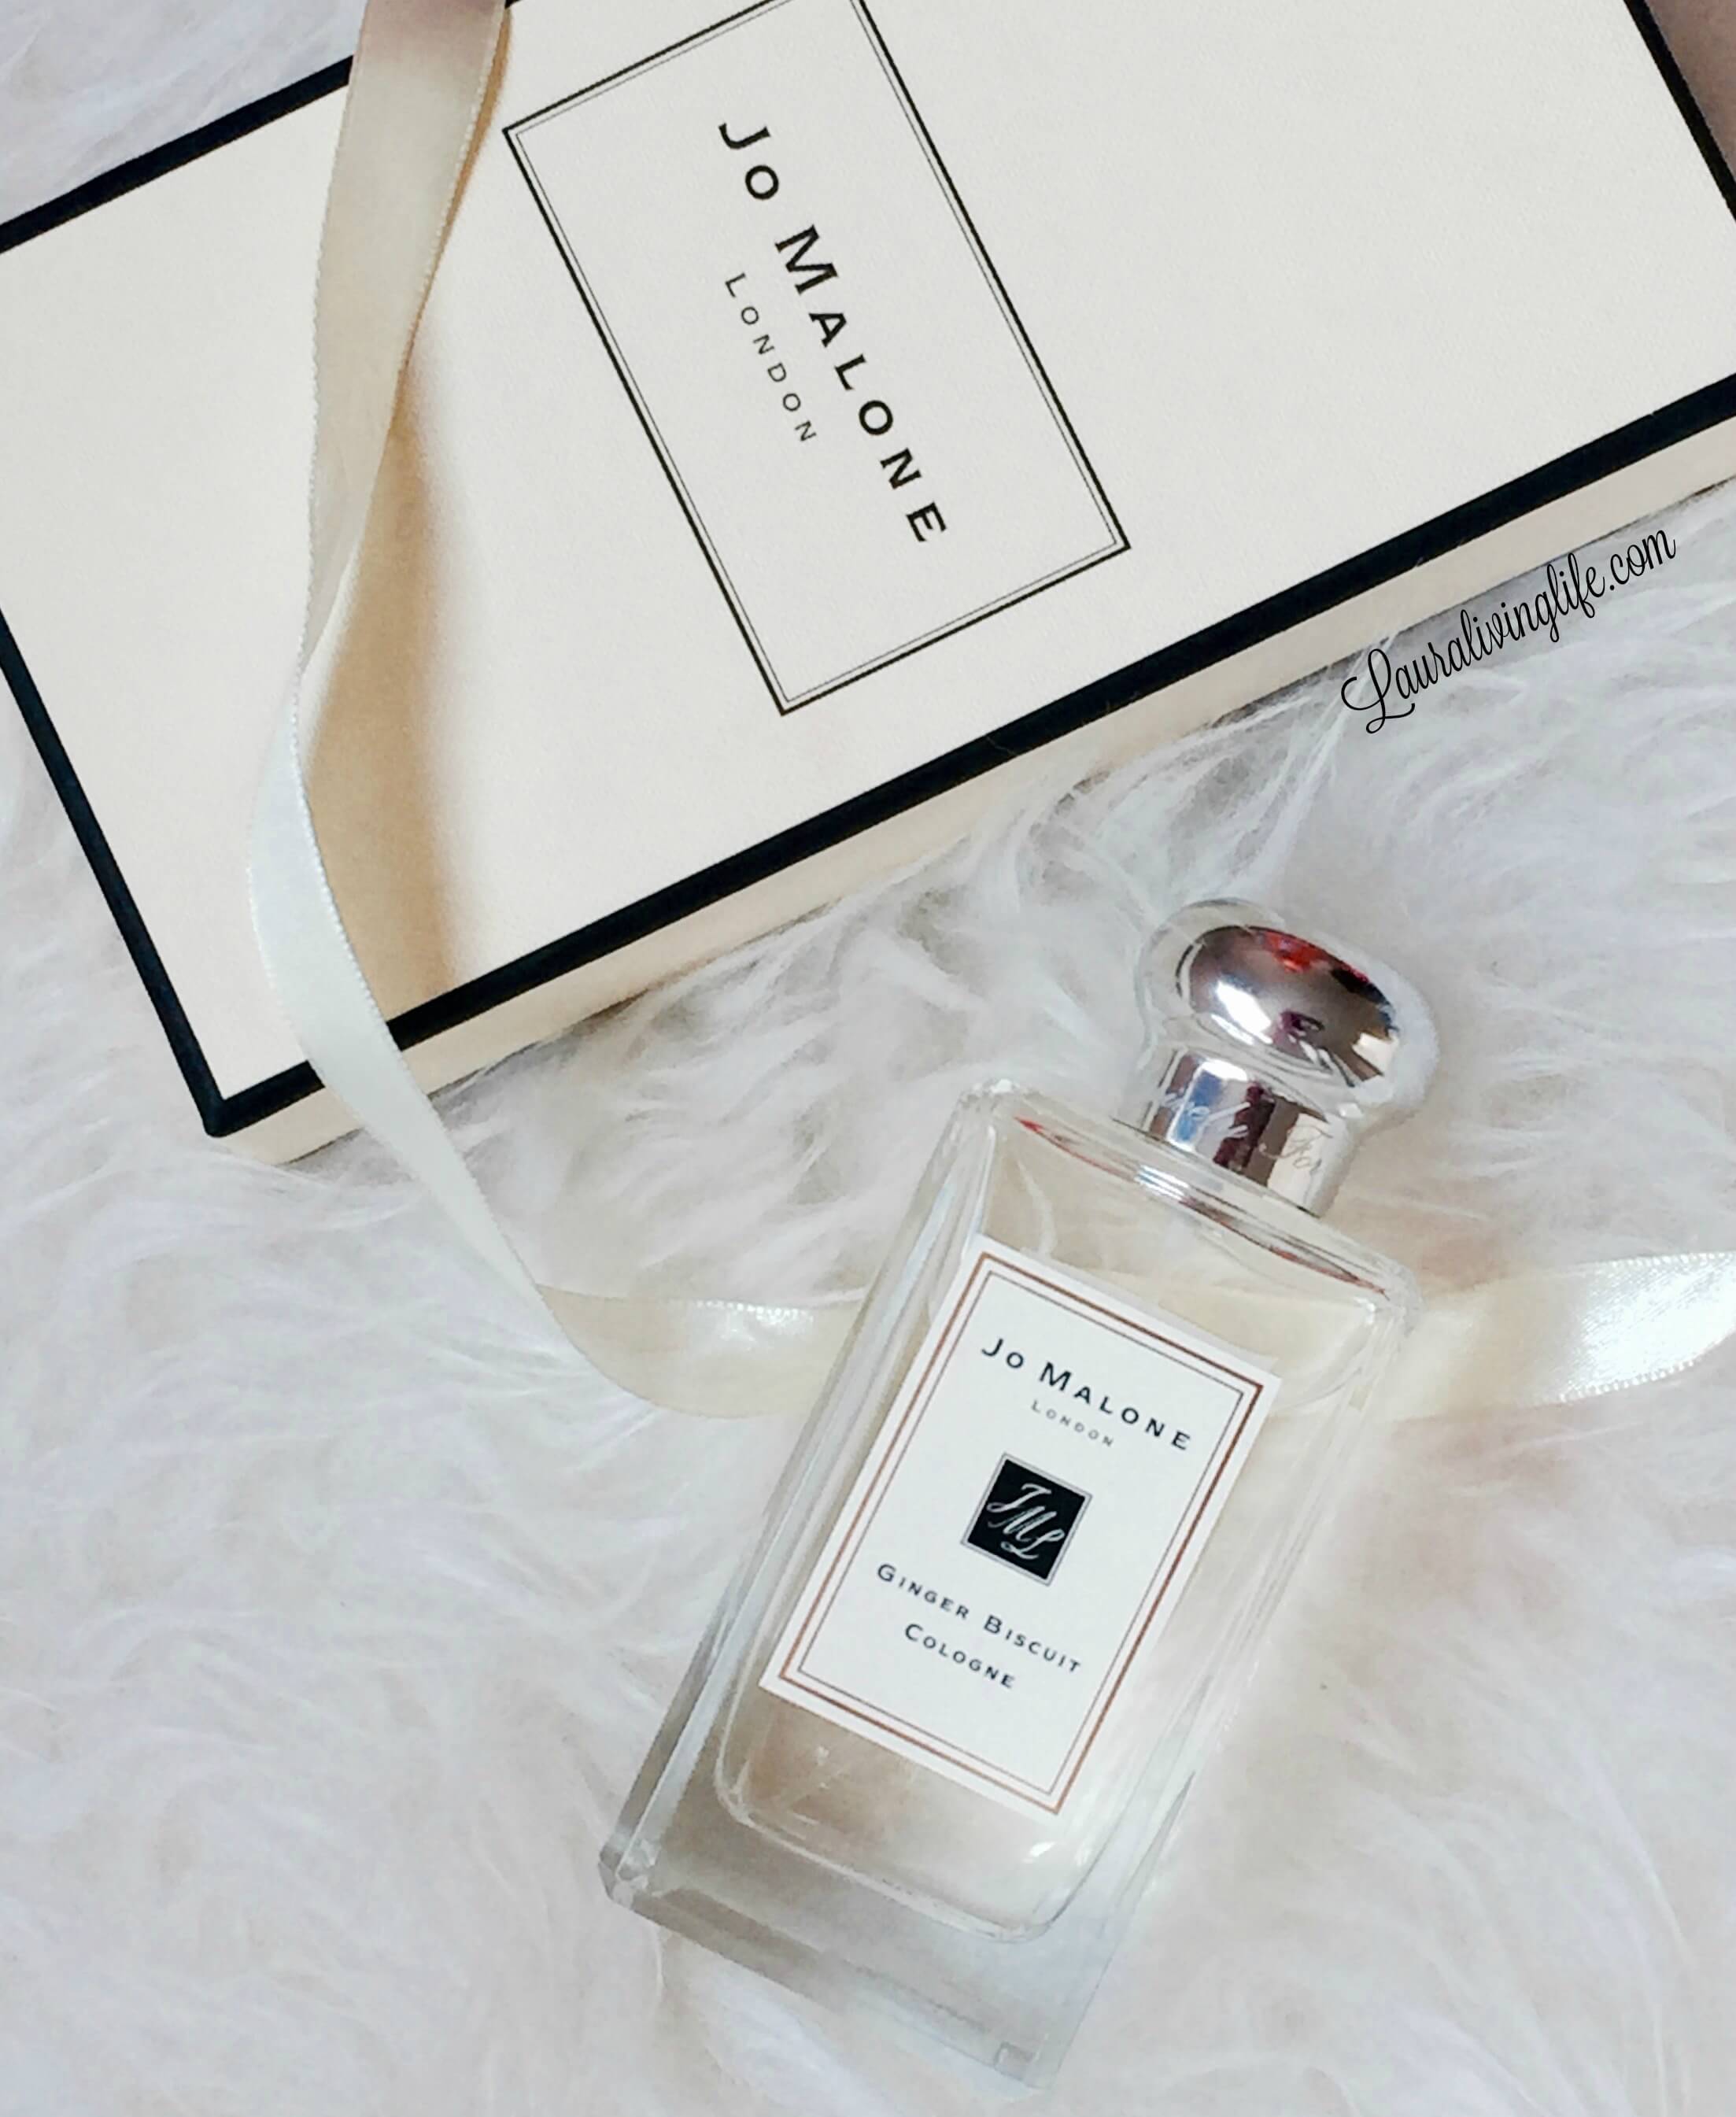 Jo Malone Ginger Biscuit Cologne review